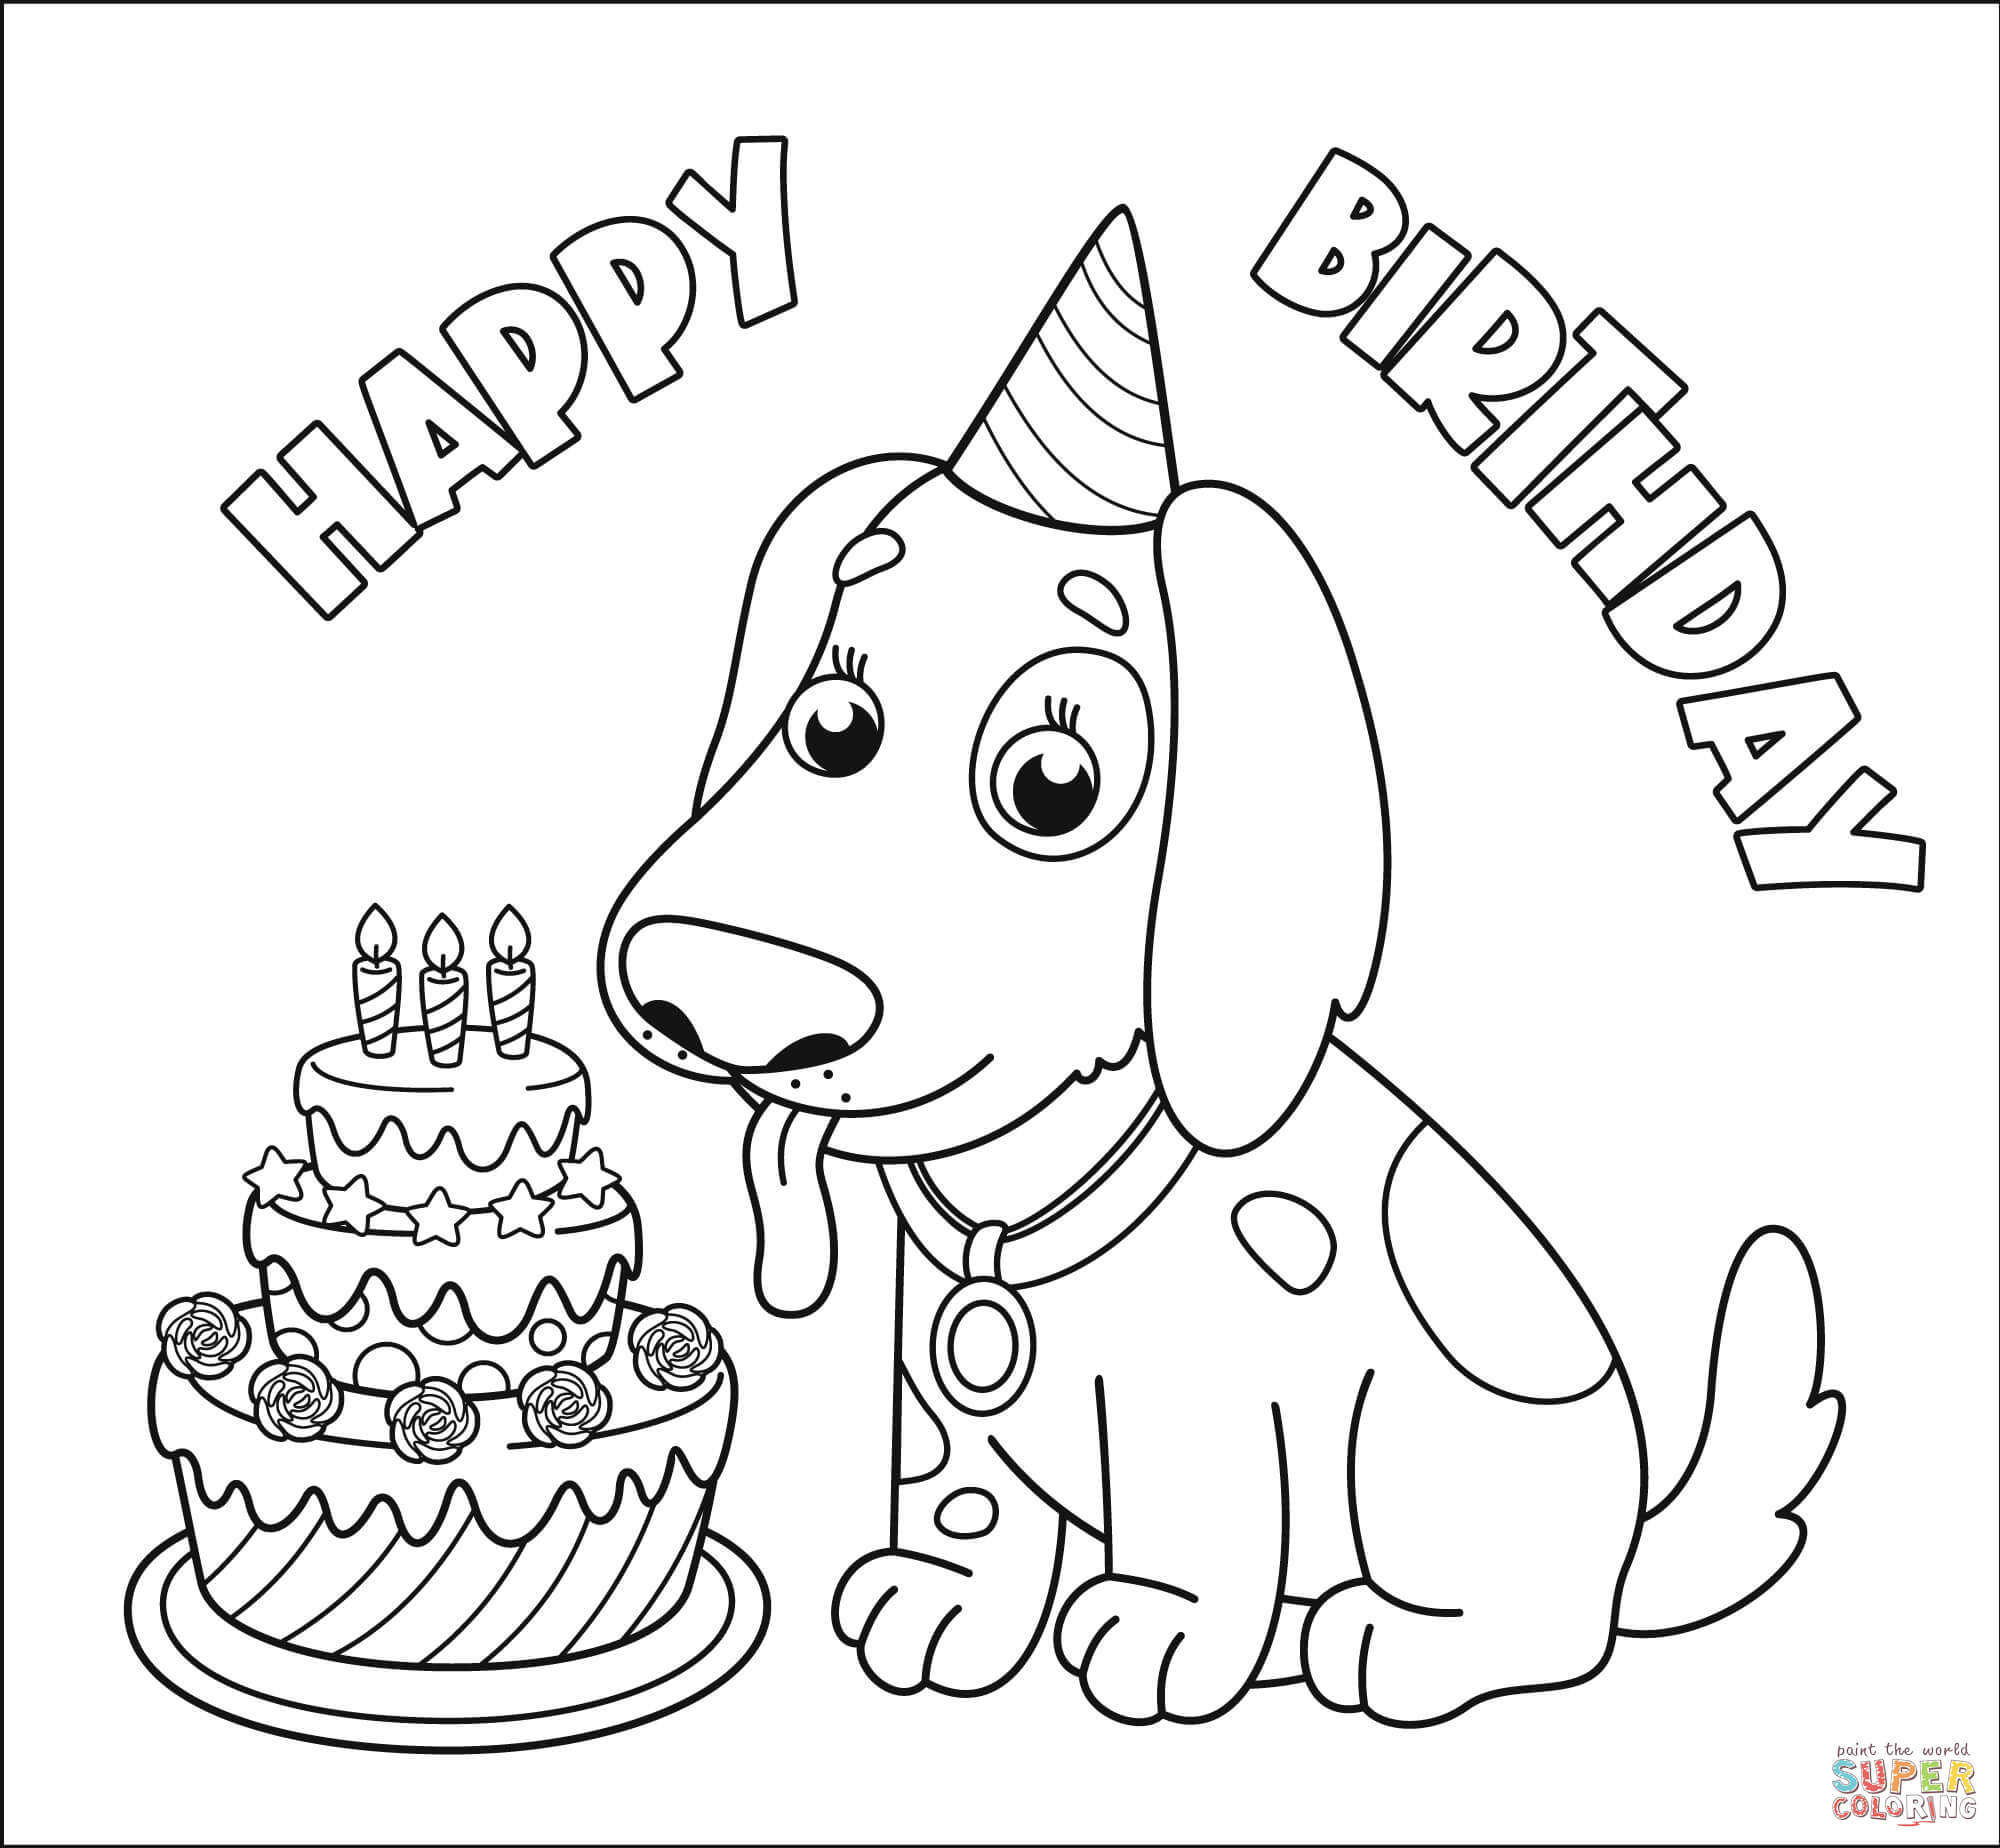 Happy birthday with dog coloring page free printable coloring pages